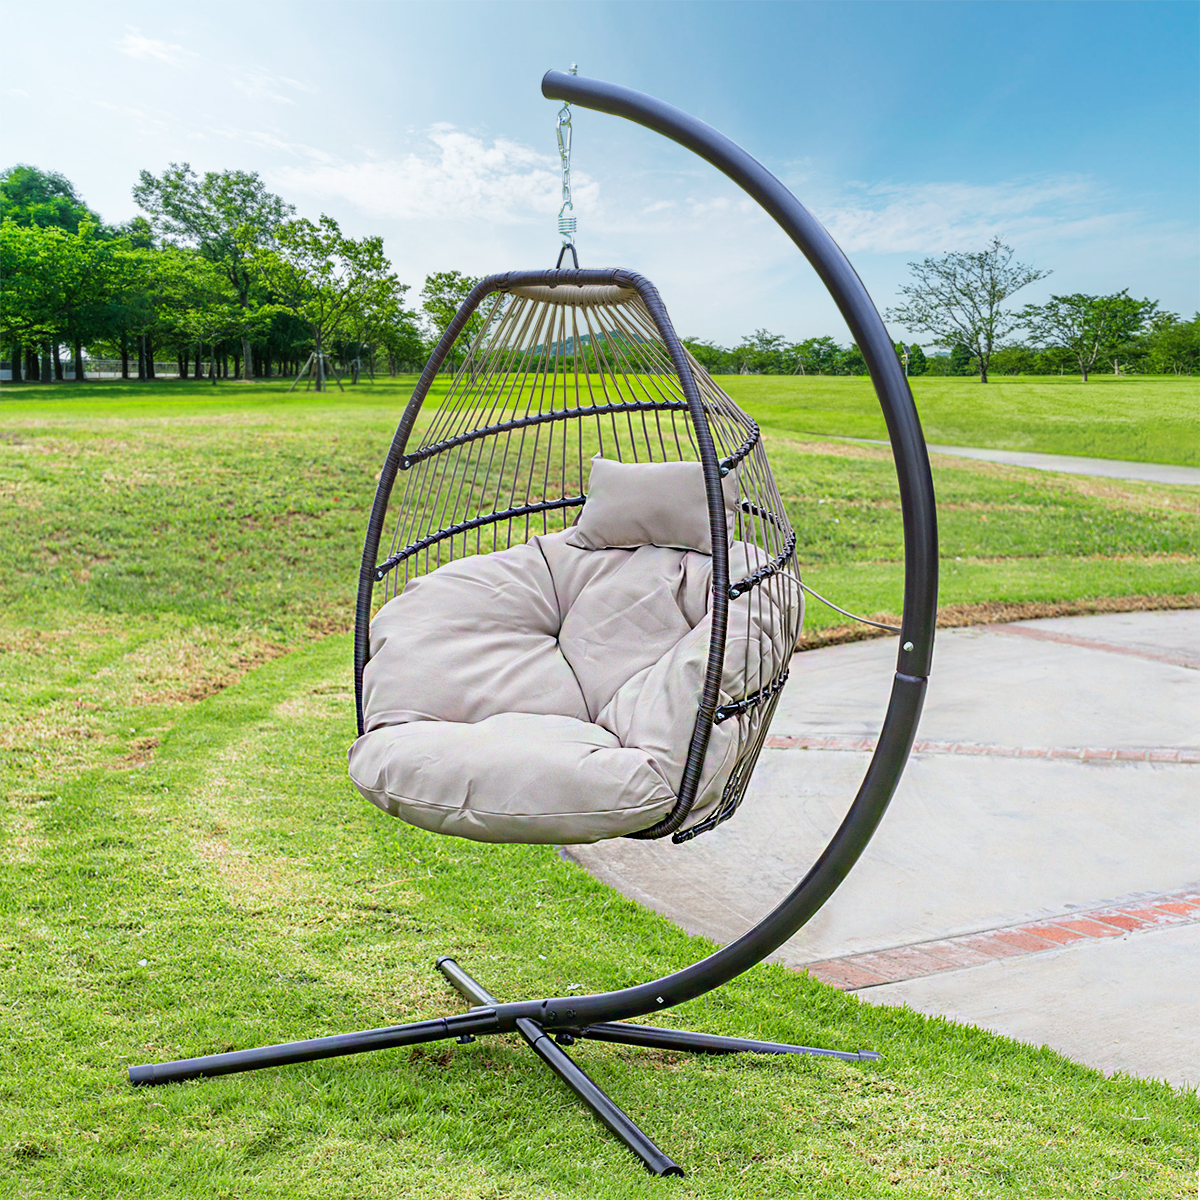 Barton Hanging Egg Swing Chair UV-Resistant Soft Cushion Large Basket Patio Seating, Beige - image 1 of 7